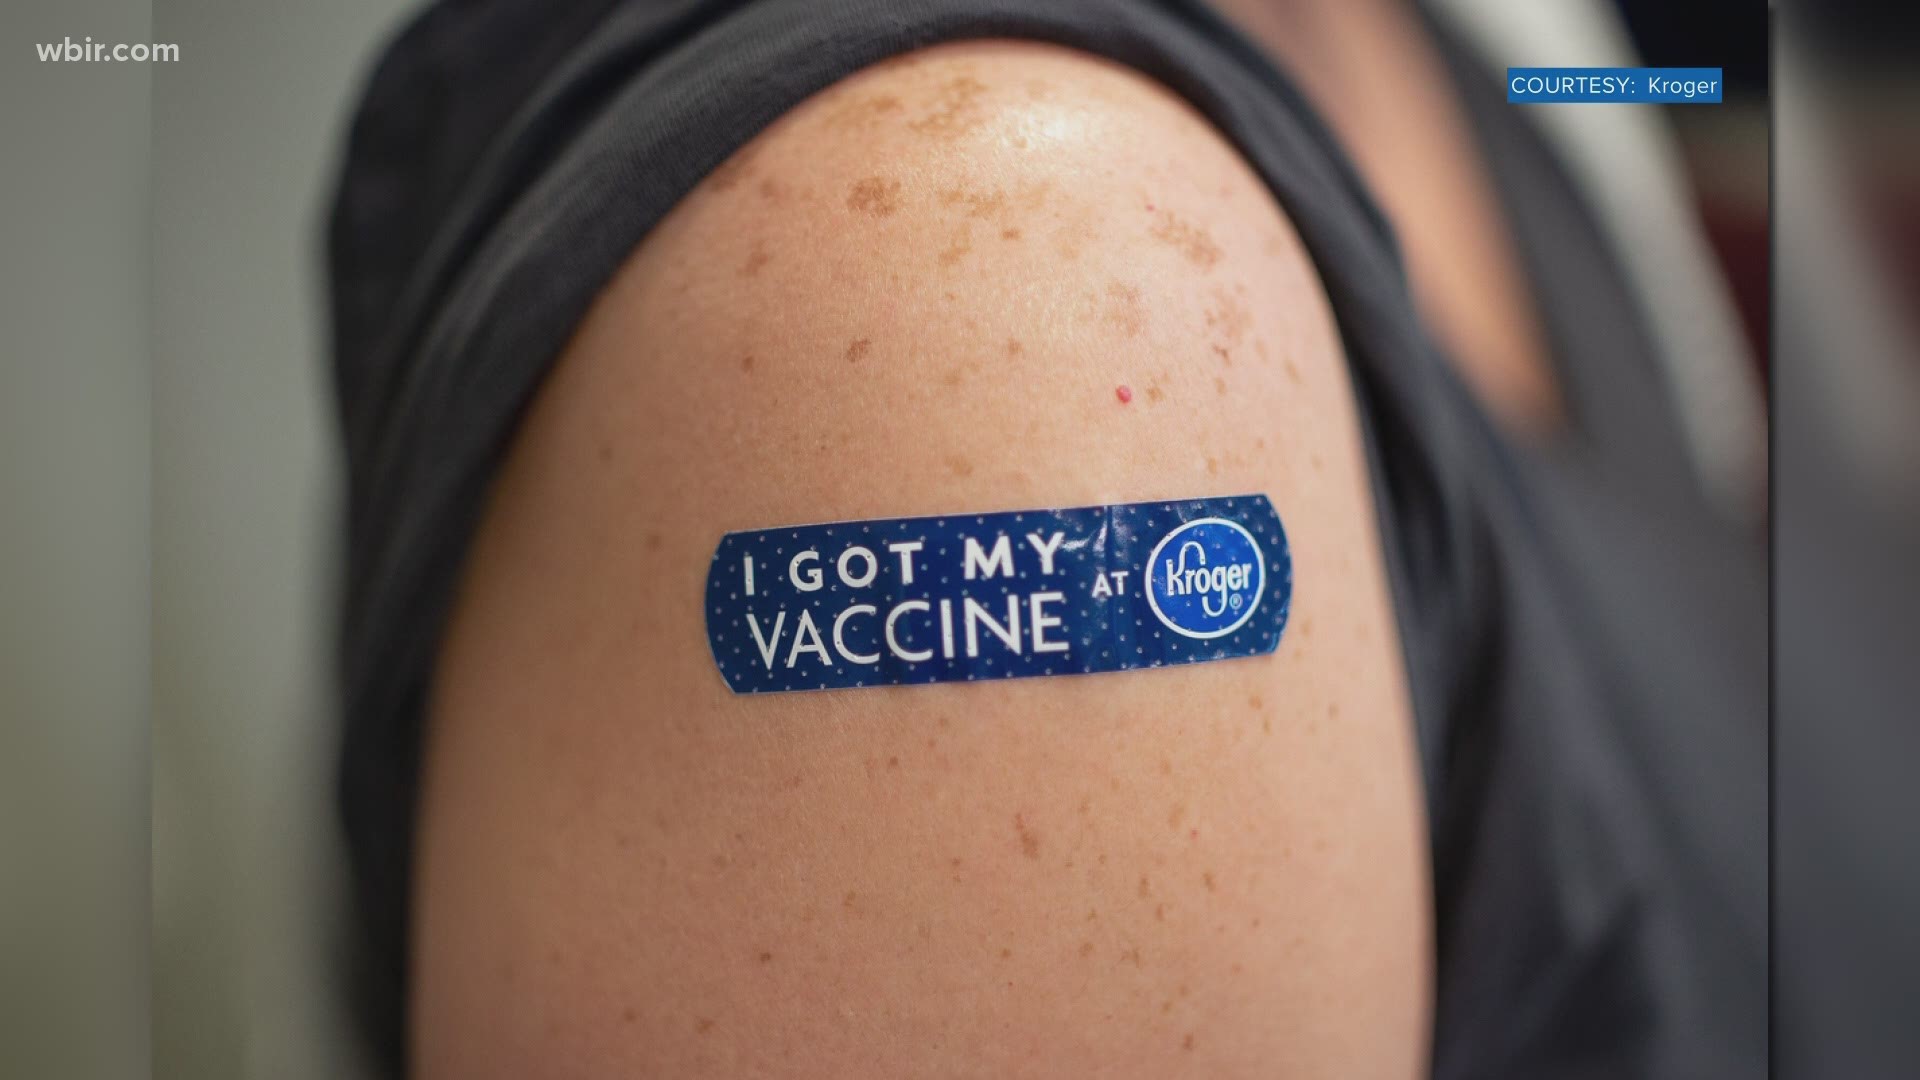 Officials encouraged the public to get the first vaccine available to them.